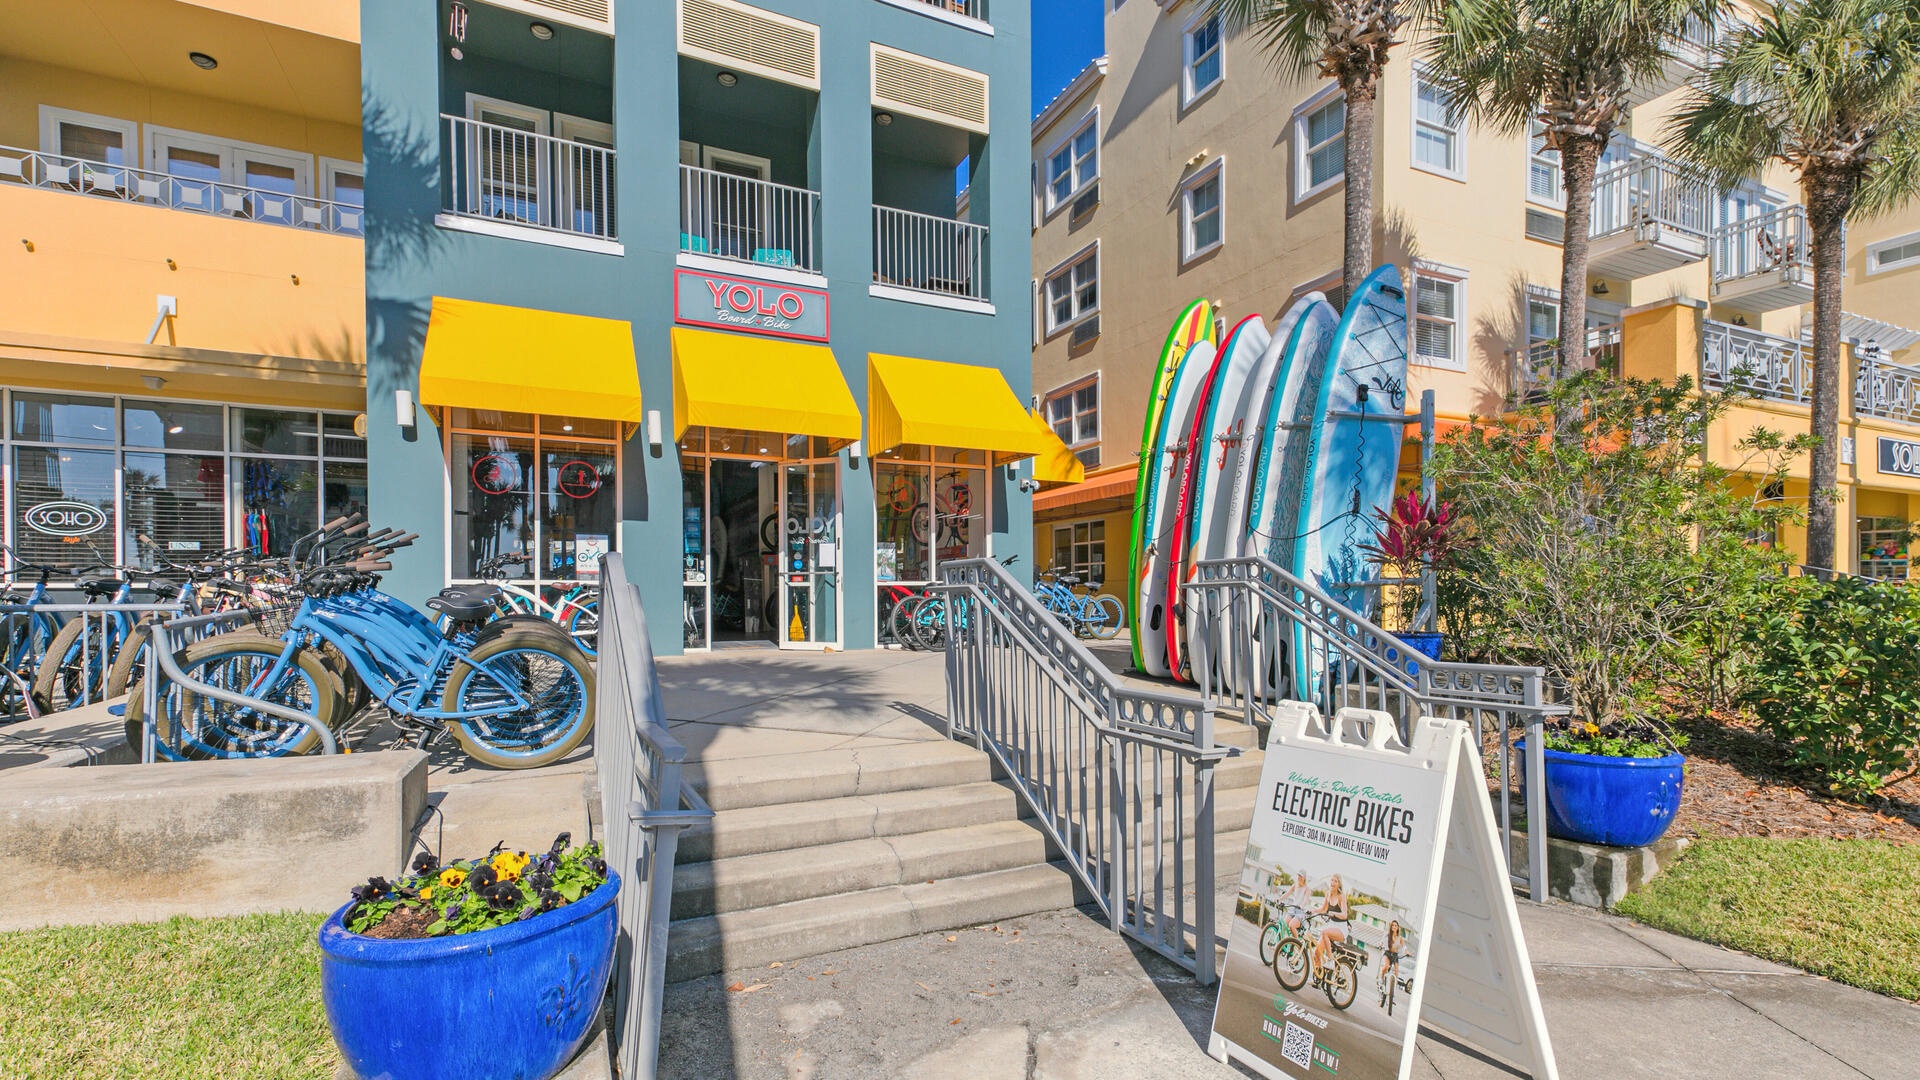 Dining, shopping and fun at nearby Gulf Place!